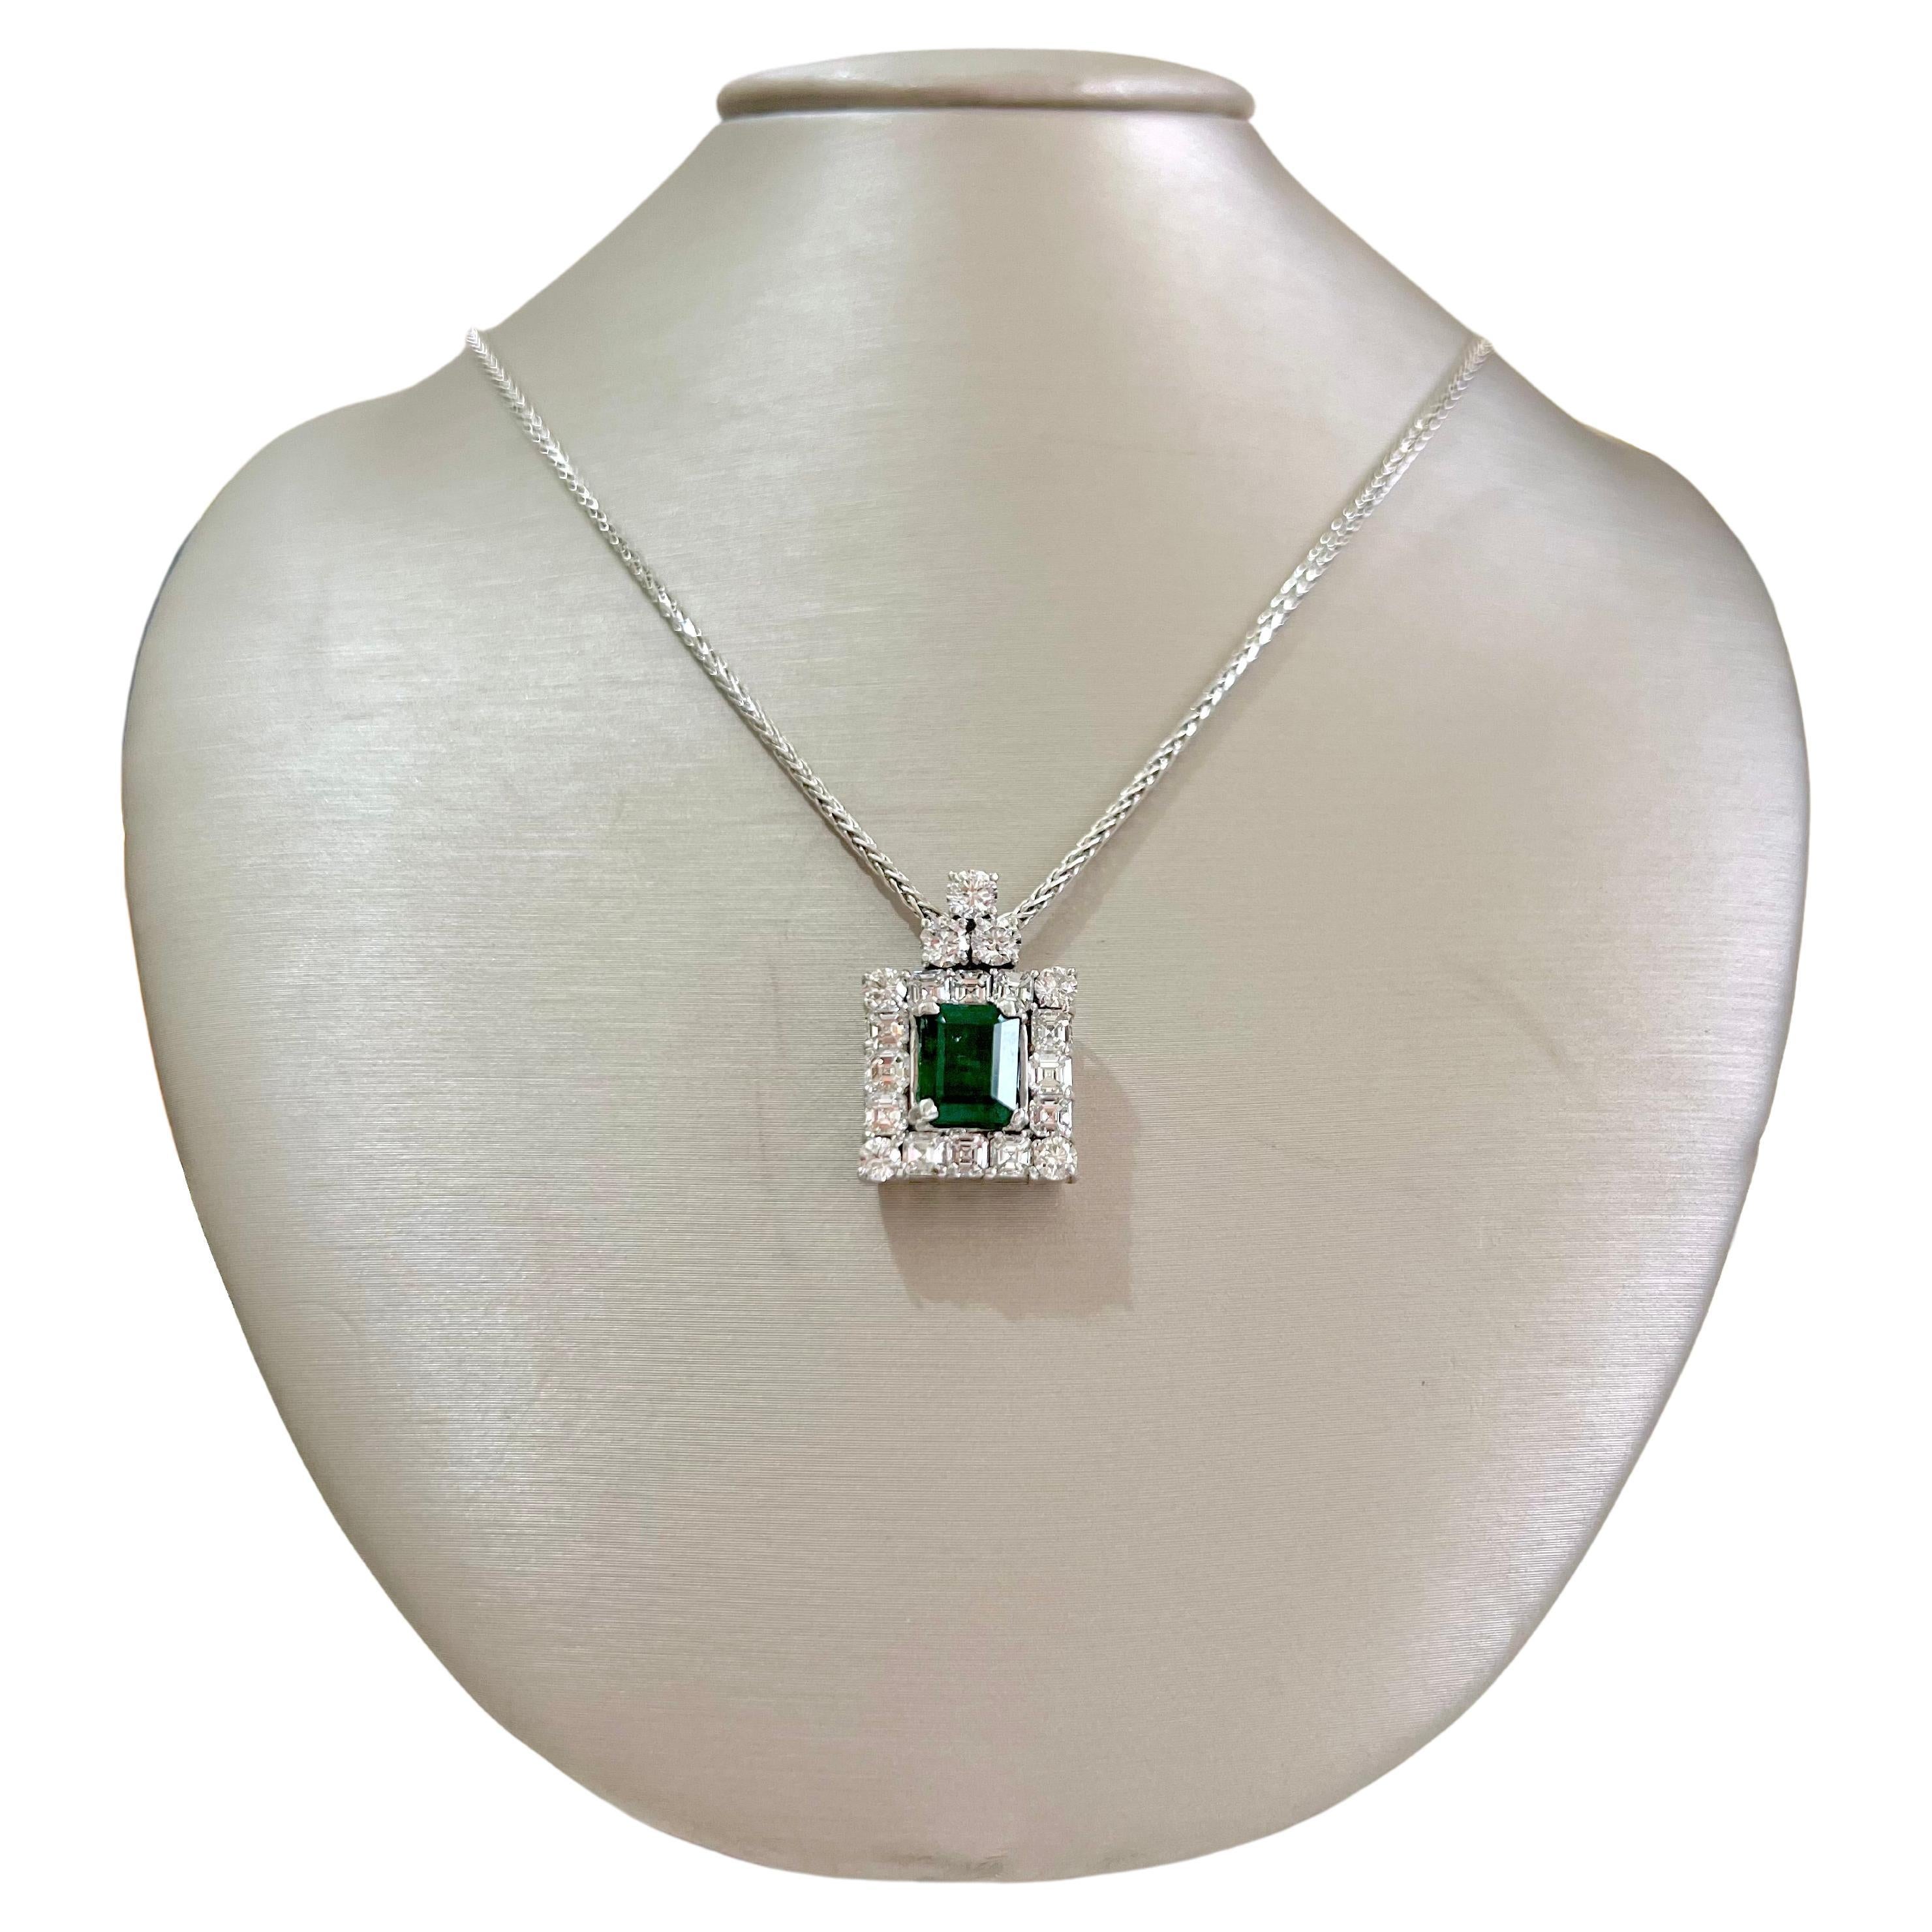 This stunning Zambian emerald is set in the middle of a custom made 18k white gold setting with gorgeous asscher cut diamonds and round brilliant diamonds.  The 4 round brilliant diamonds are strategically placed in the corners, while the asscher